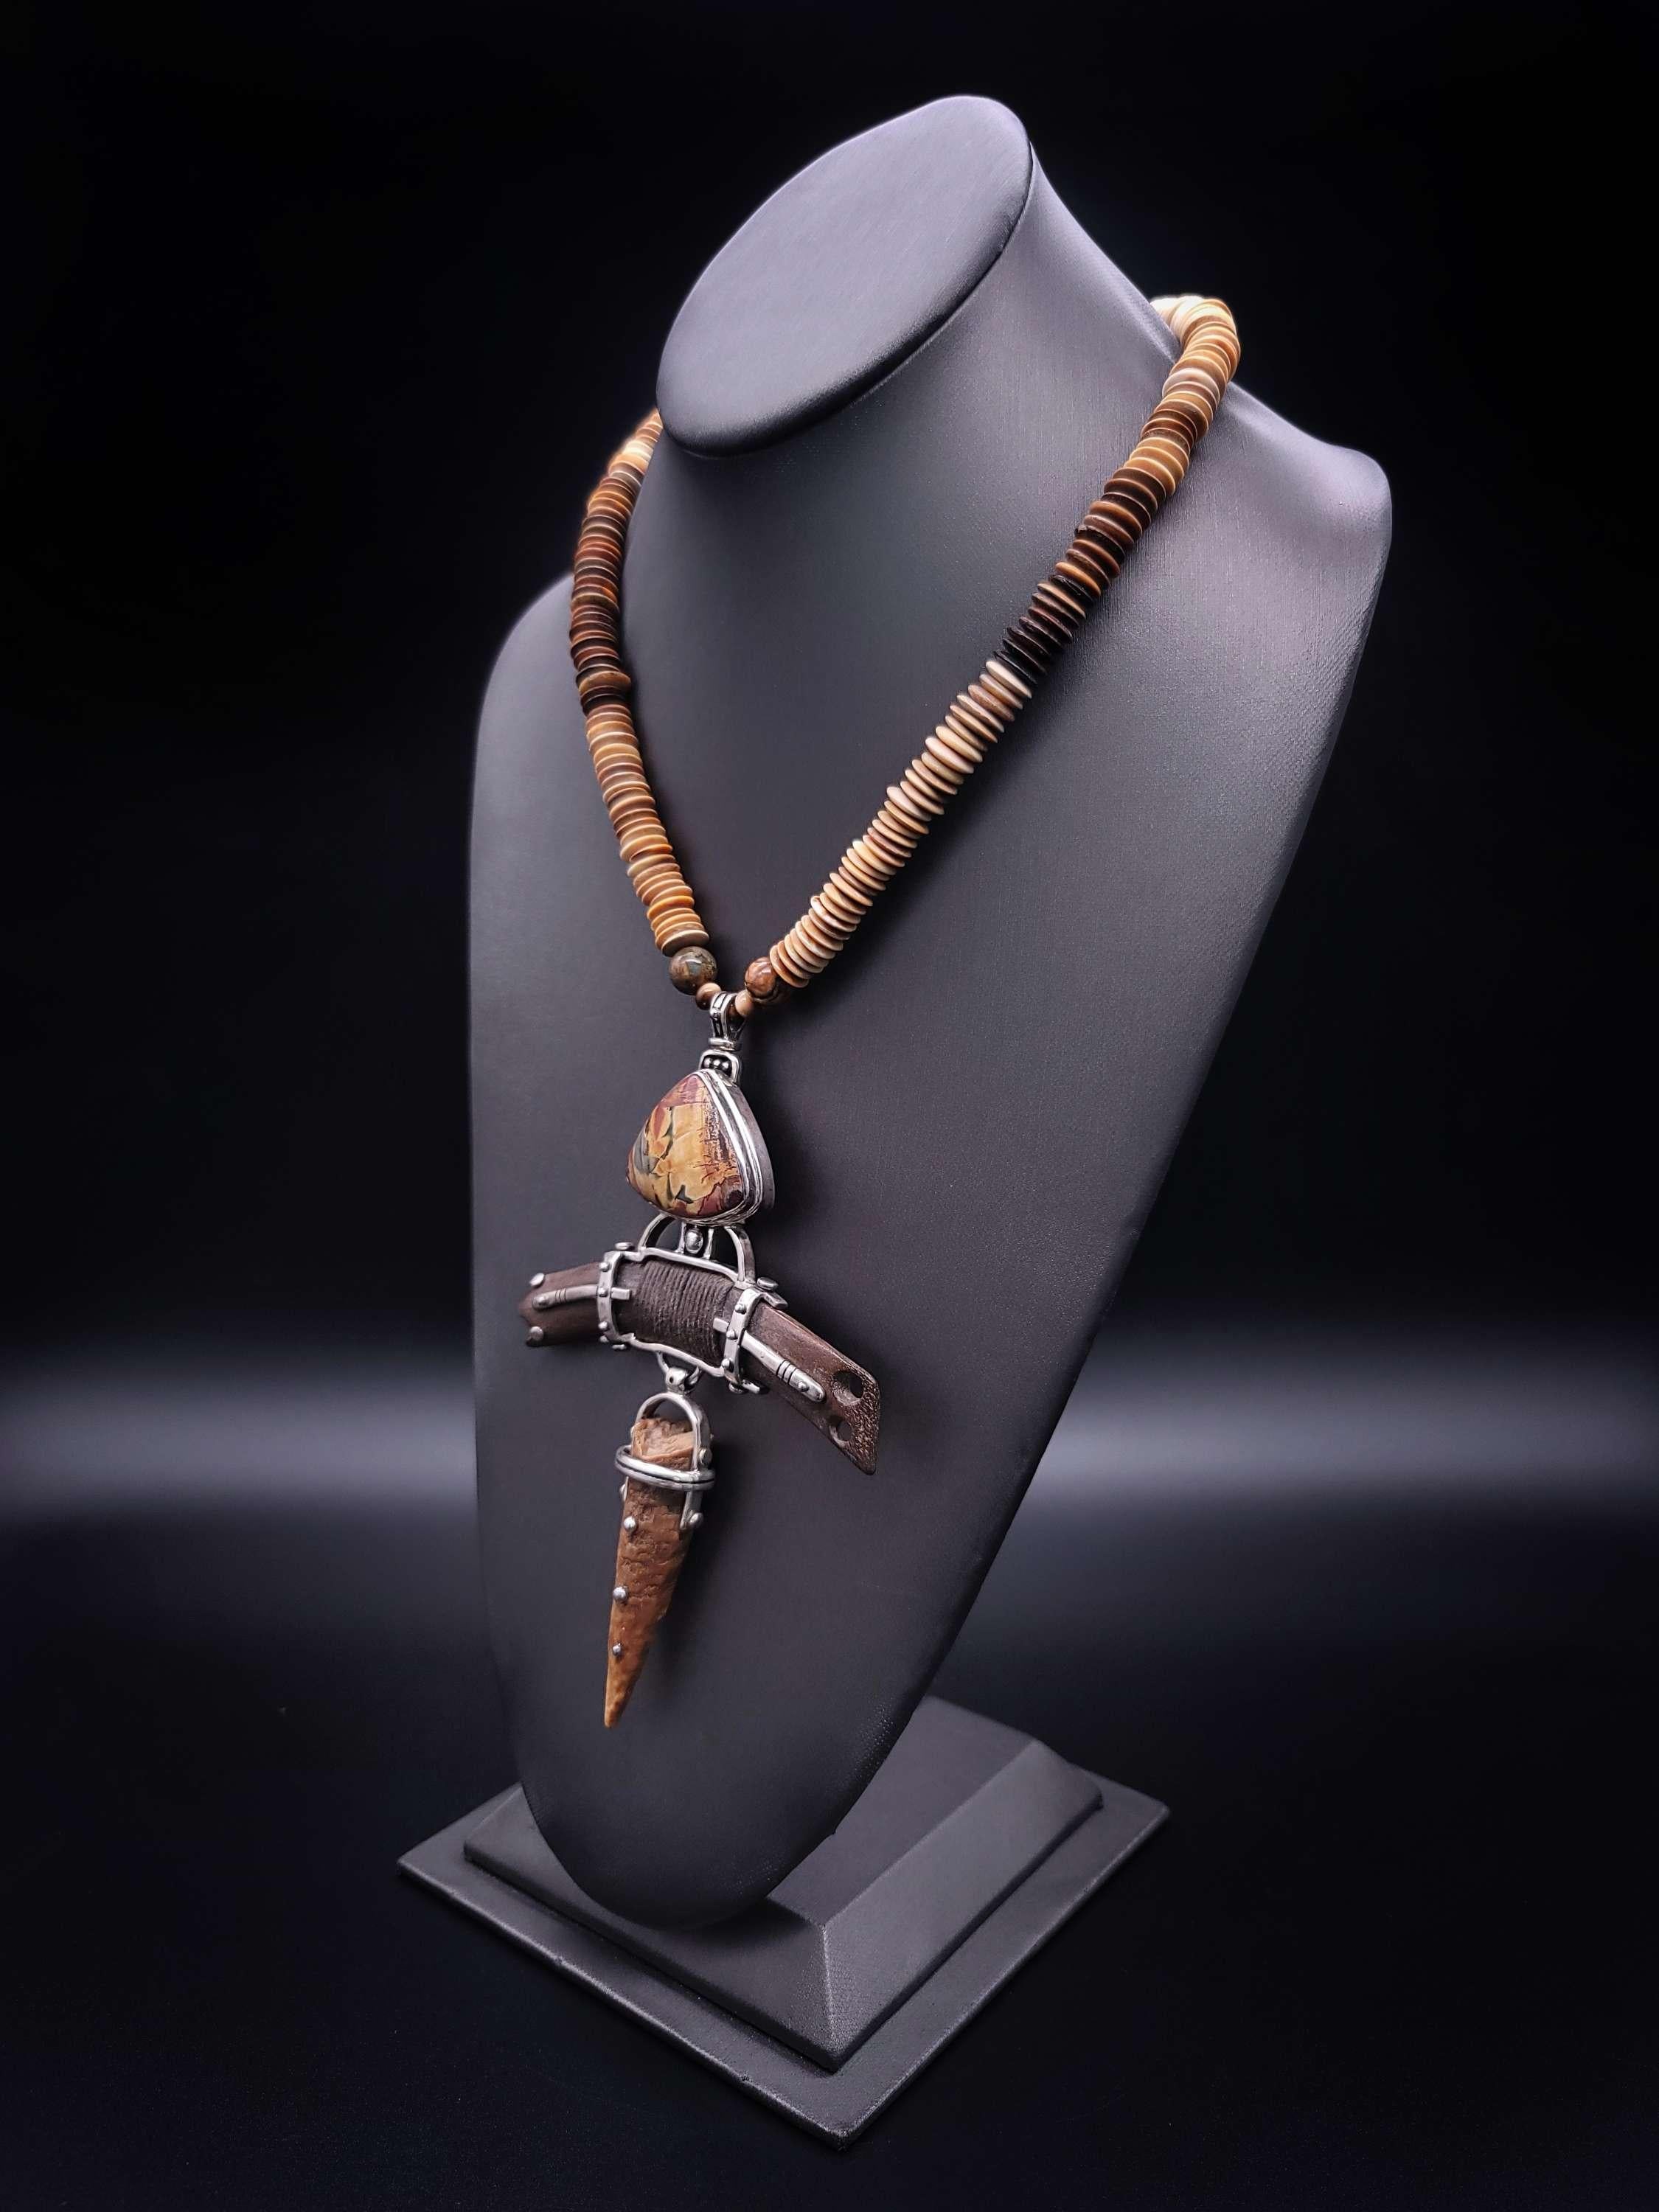 Mixed Cut A.Jeschel Stunning Jasper necklace with a Fossilized relic Pendant. For Sale